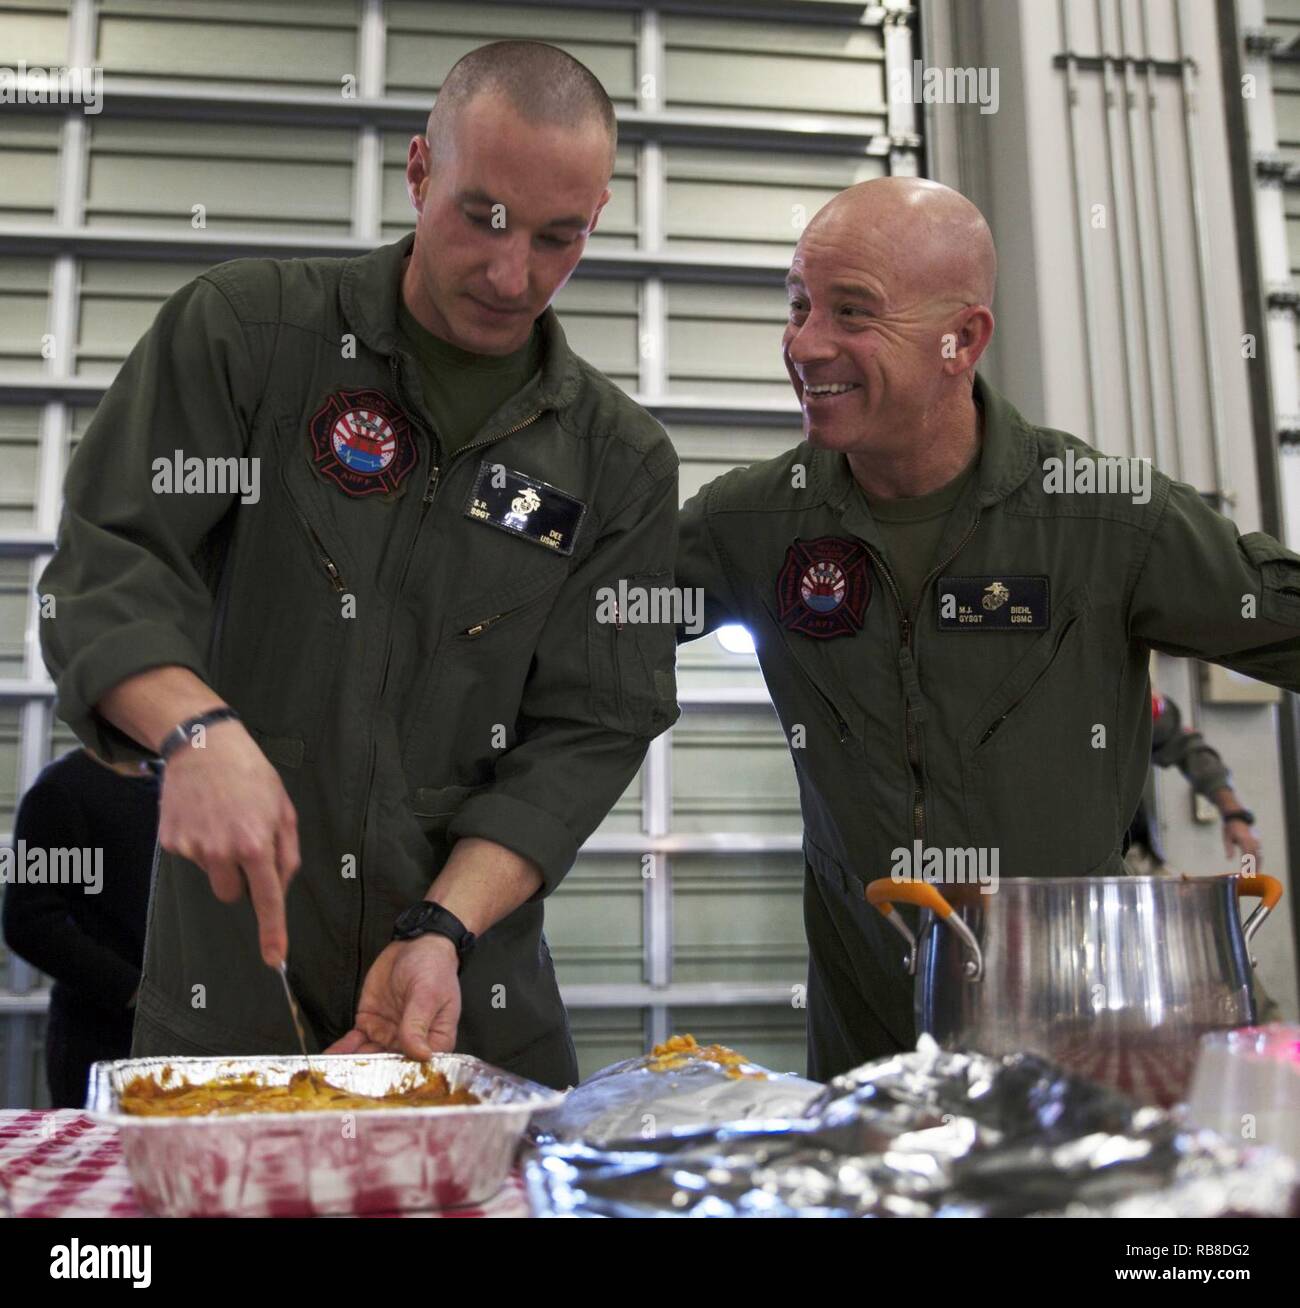 U.S. Marine Corps Staff Sgt. Sean Dee, left, the Aircraft Rescue and Firefighting station captain, and Gunnery Sgt. Matthew Viehl, assistant chief of operations at ARFF, prepare to serve food for the ARFF Tsuta Orphanage Christmas party at Marine Corps Air Station Iwakuni, Japan, Dec. 10, 2016. ARFF holds the party annually to help spread Christmas cheer to the orphans and to bring service members, their families and the Japanese together. Marines volunteered their time and provided the children with a homemade, American meal. Stock Photo